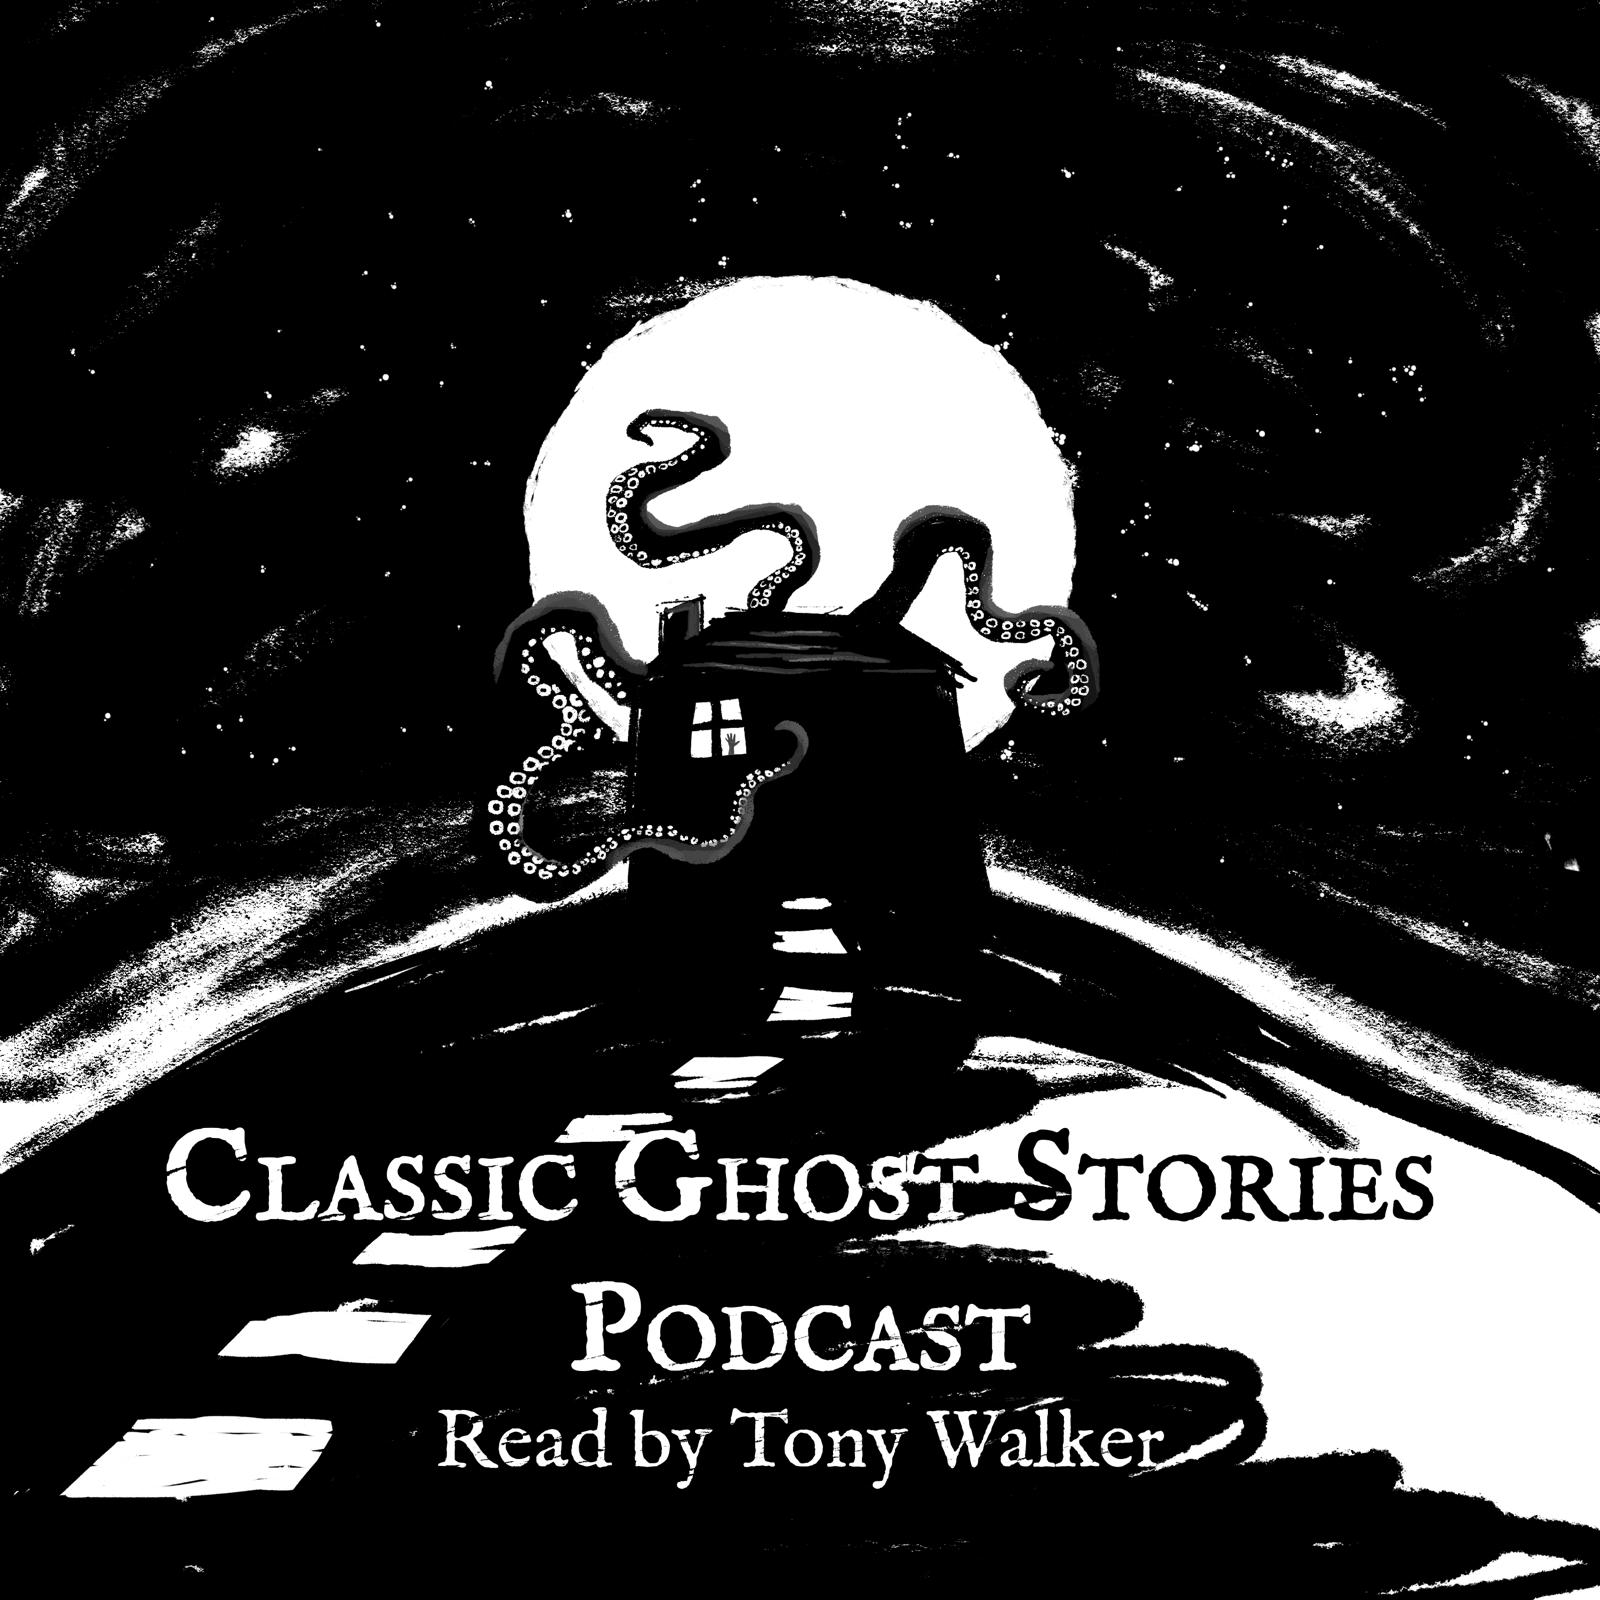 Artwork for podcast Classic Ghost Stories